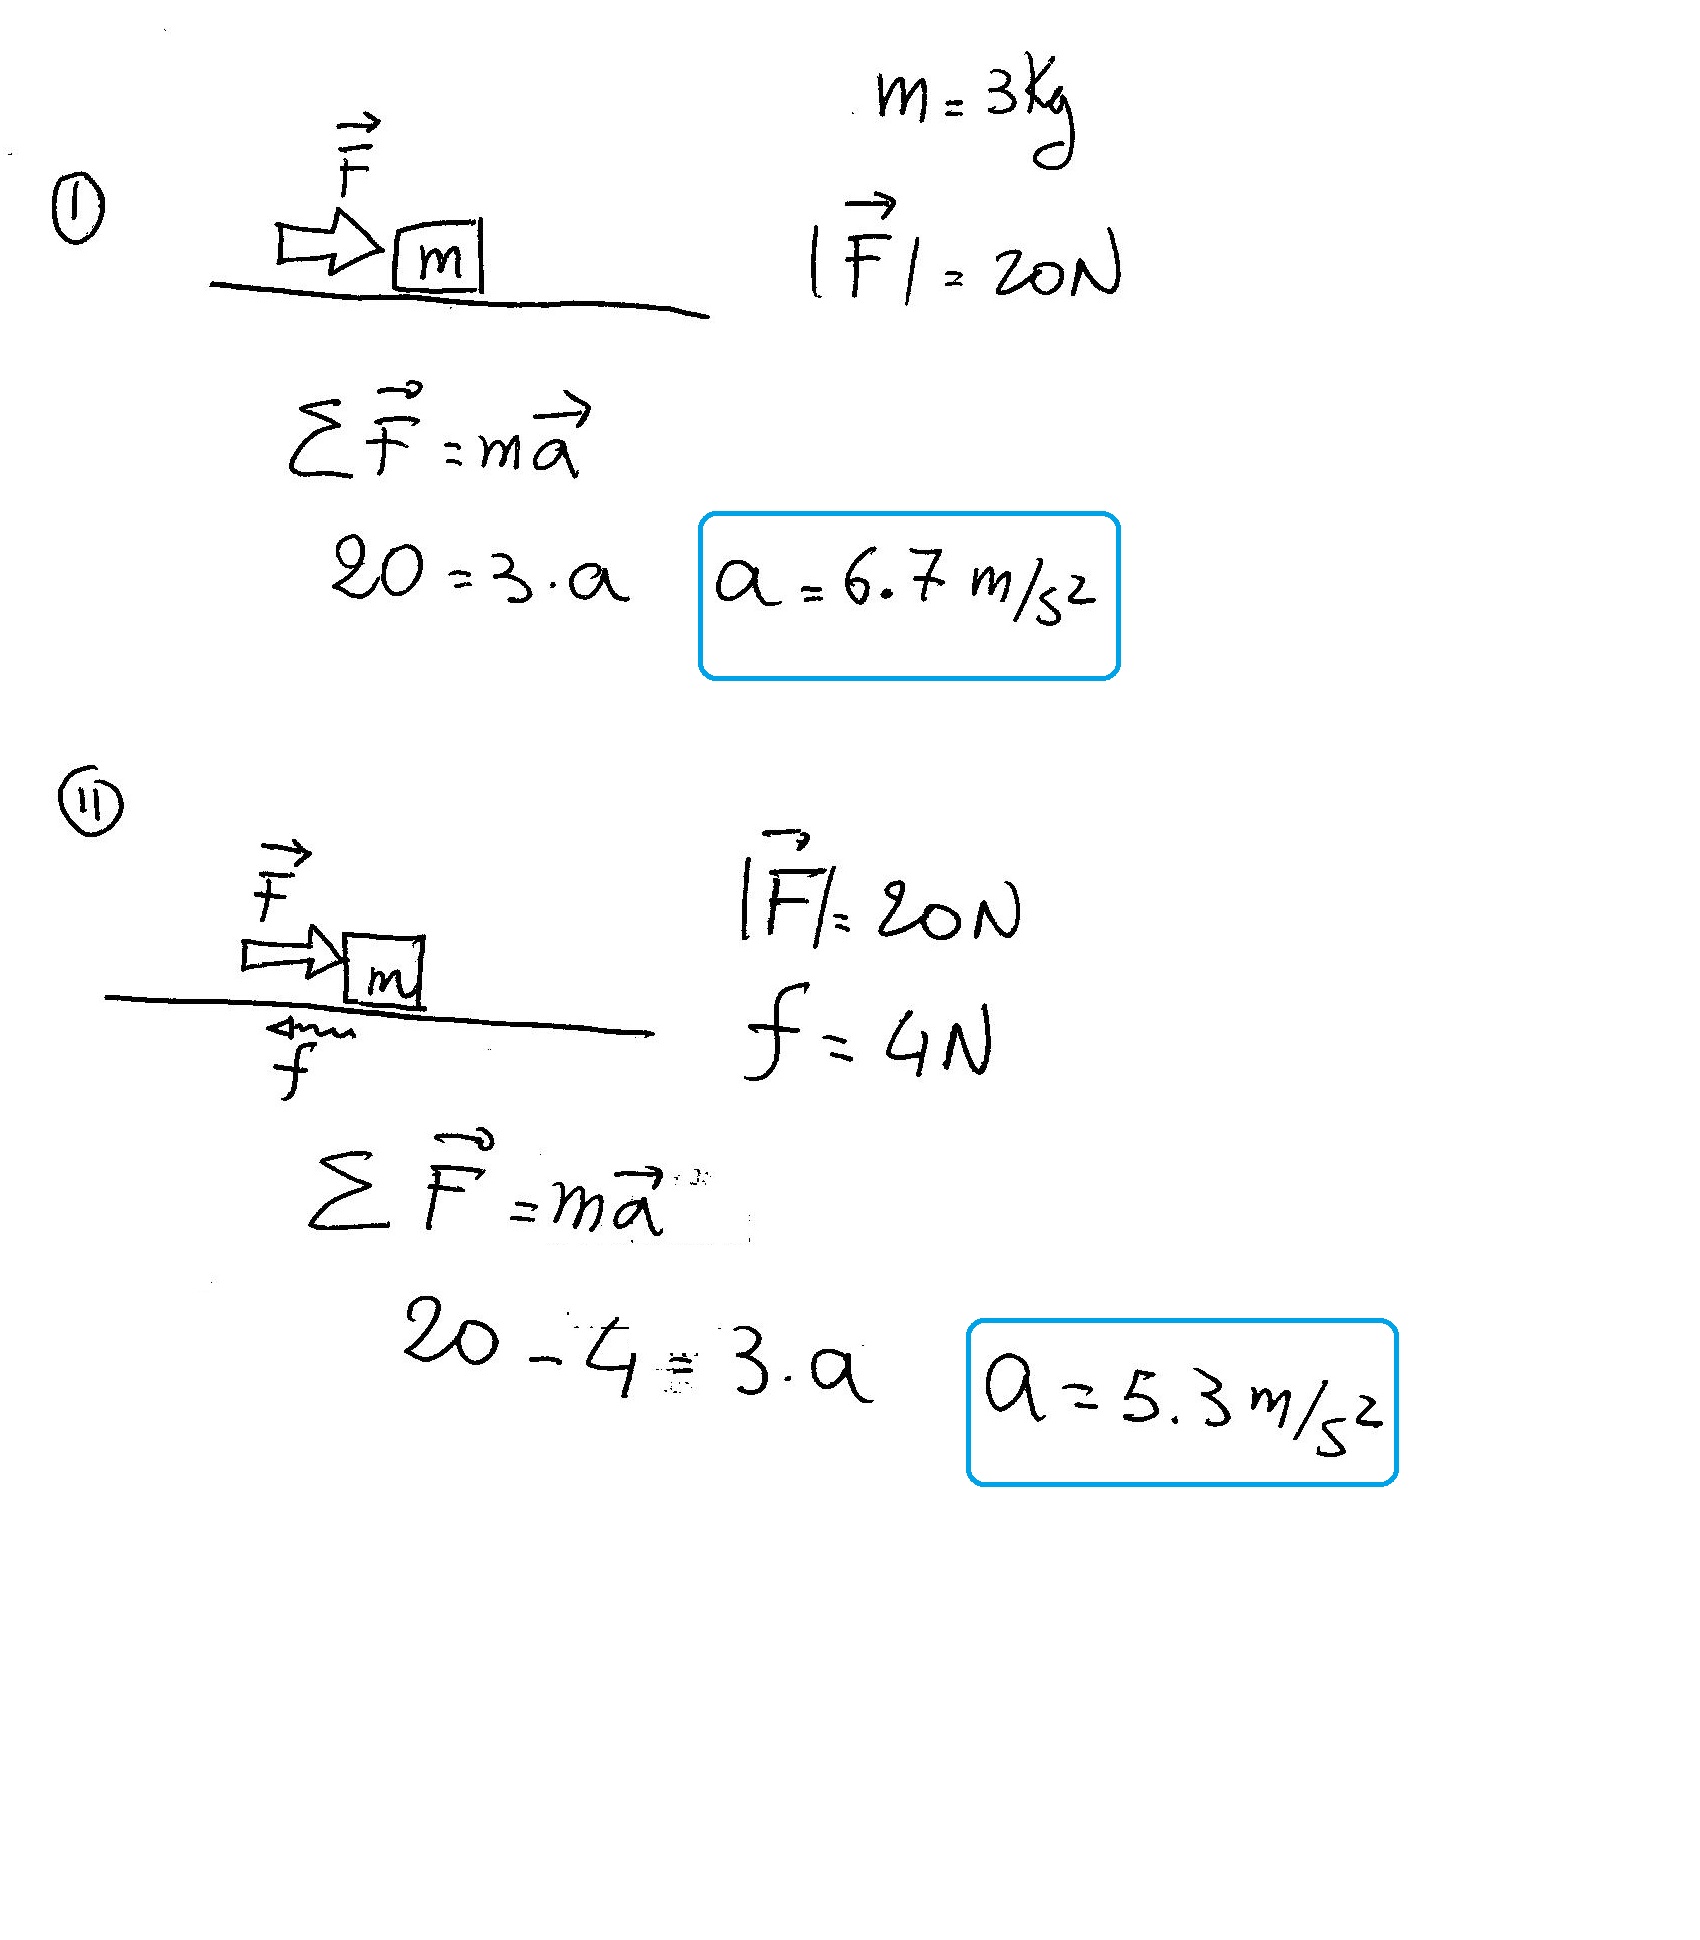 How would you calculate the acceleration if you push with a 20 N